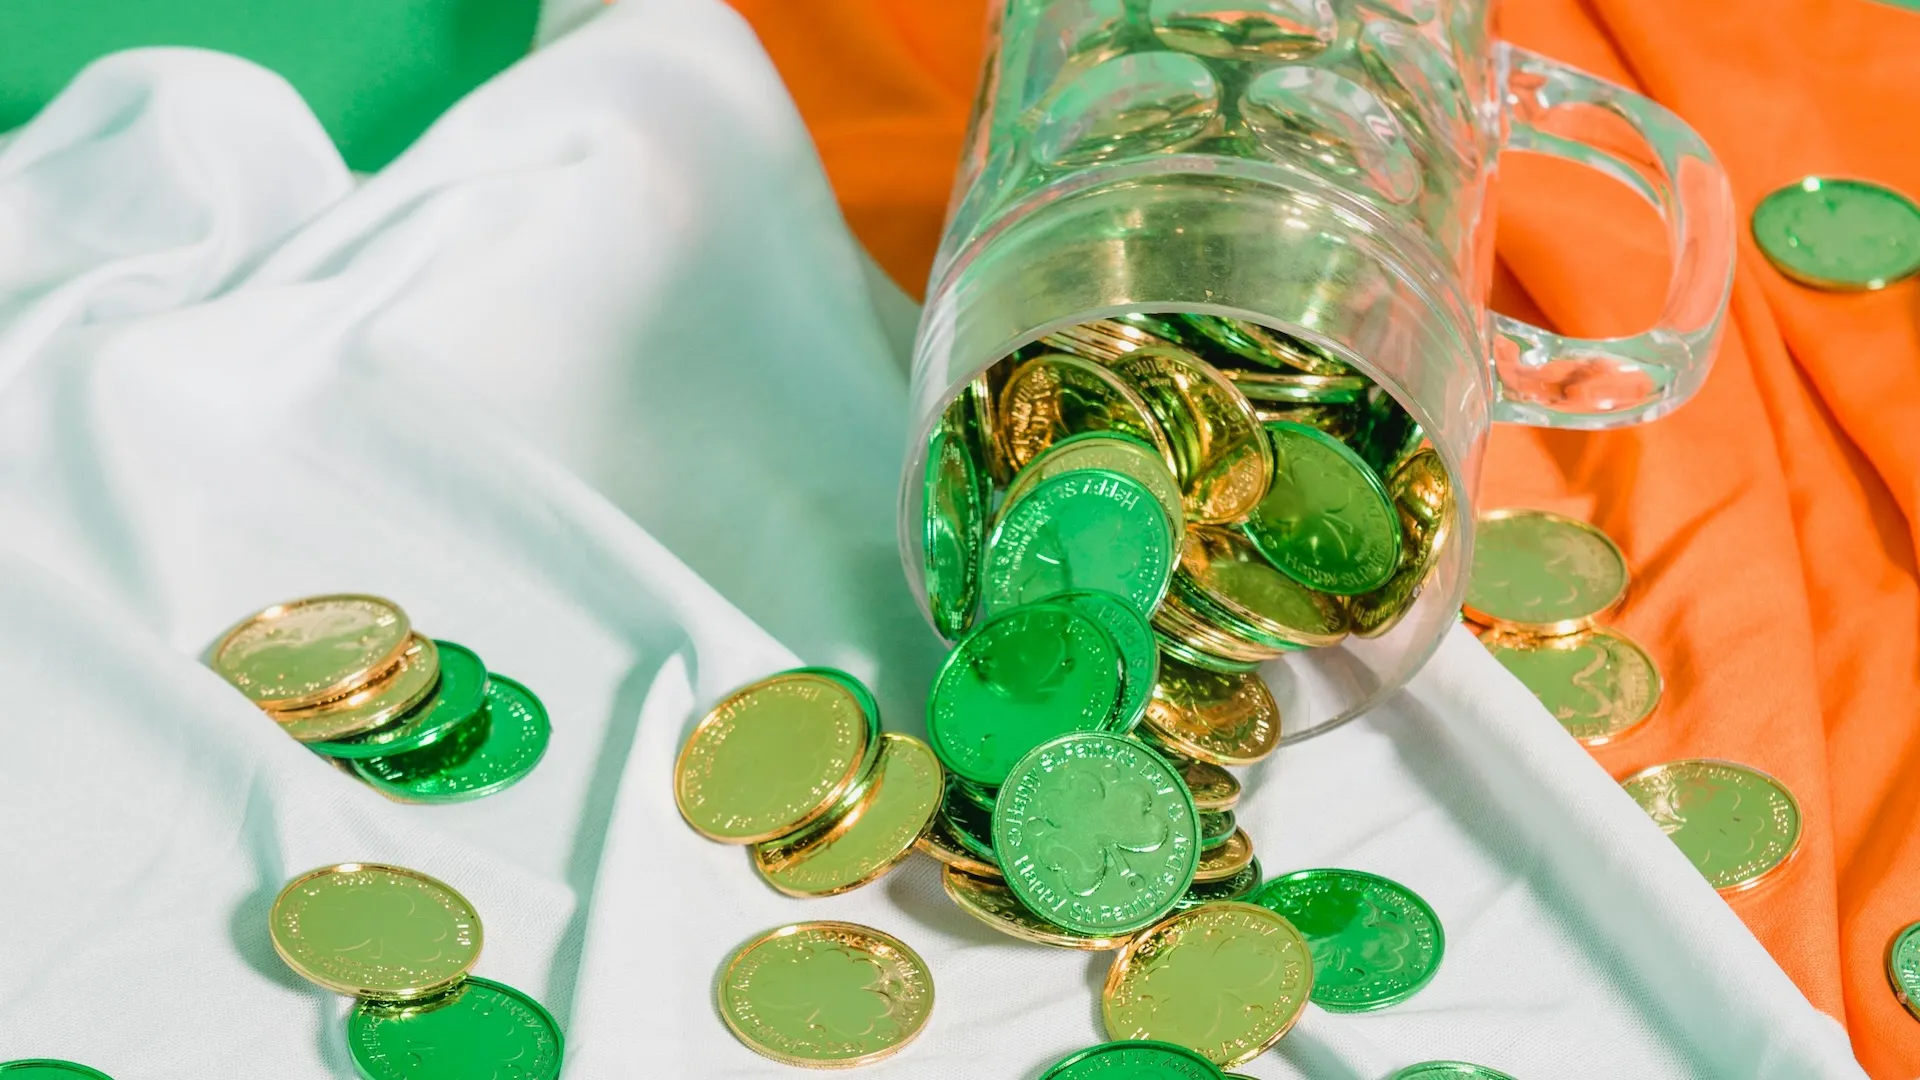 From Direct to Downright Deranged: Email Subject Line Ideas for St. Patrick's Day